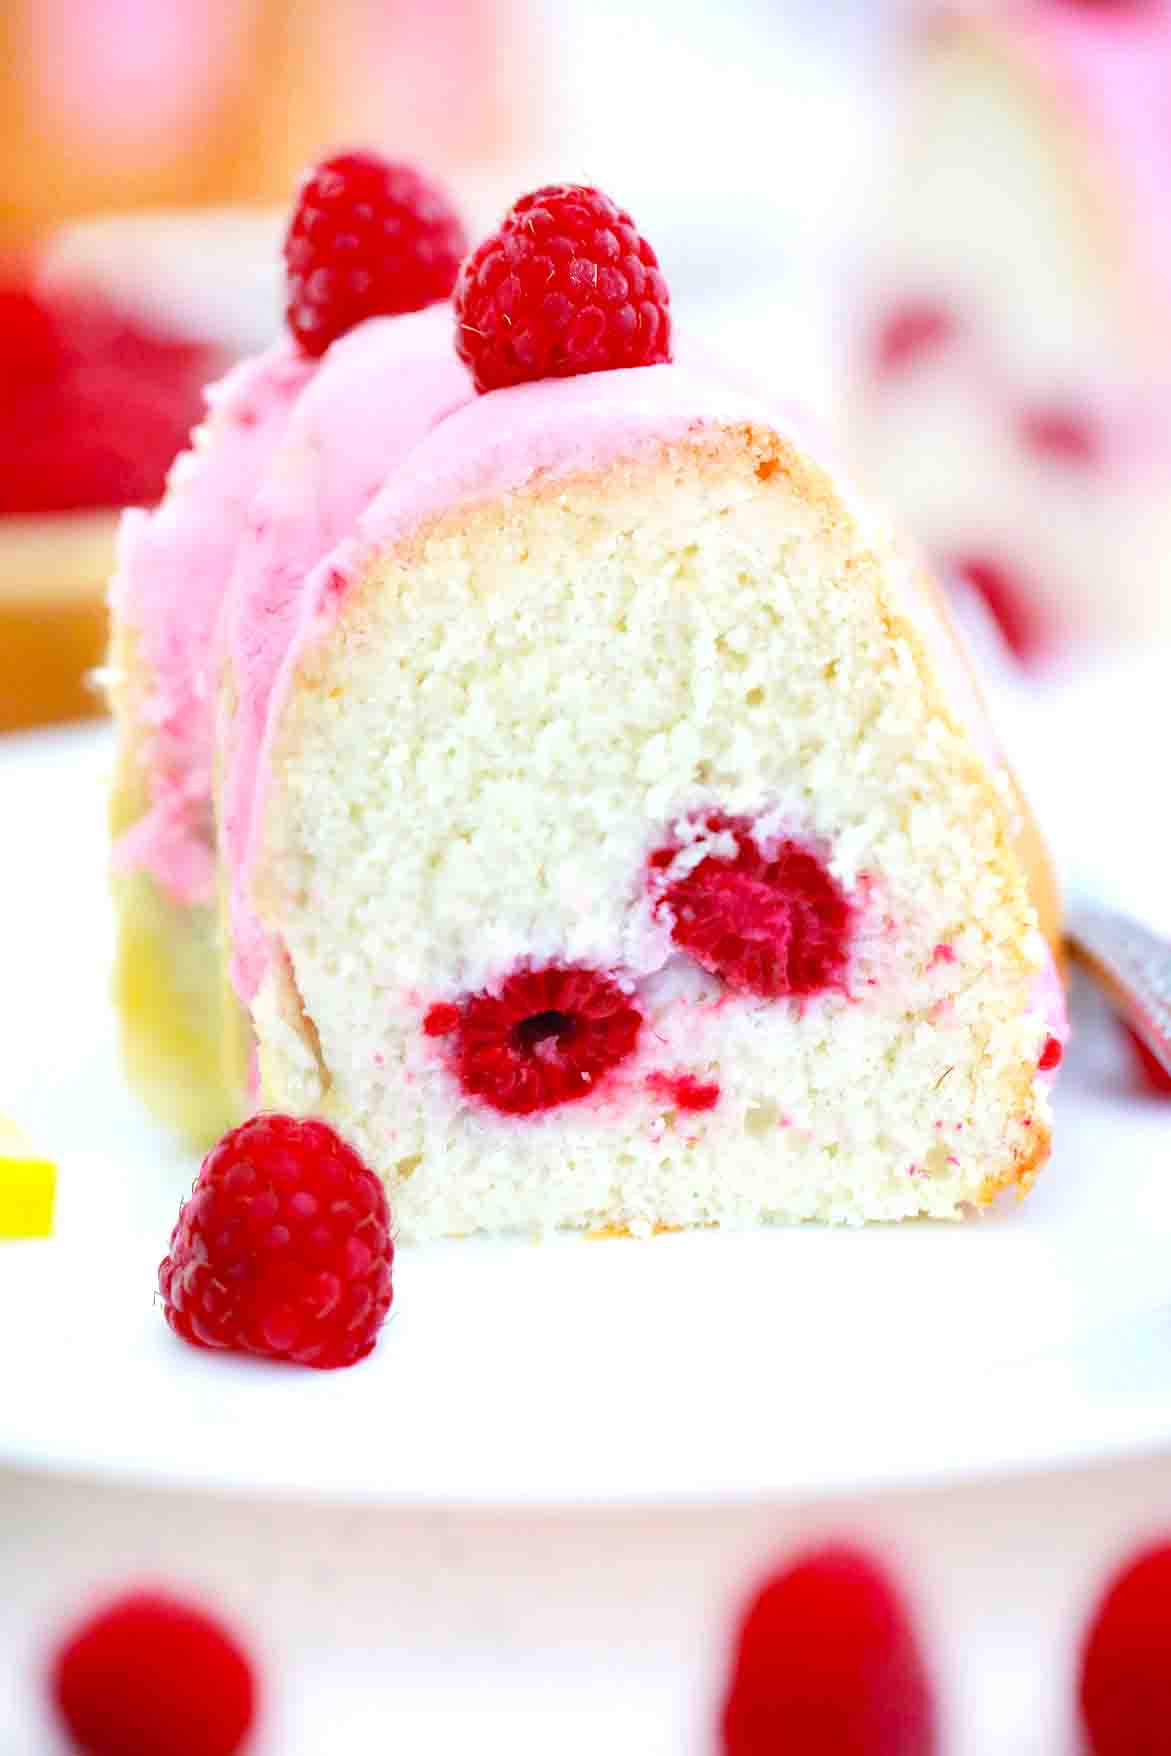 Unique Angel Food Cake Mix Recipes - Dessert with Angel Food